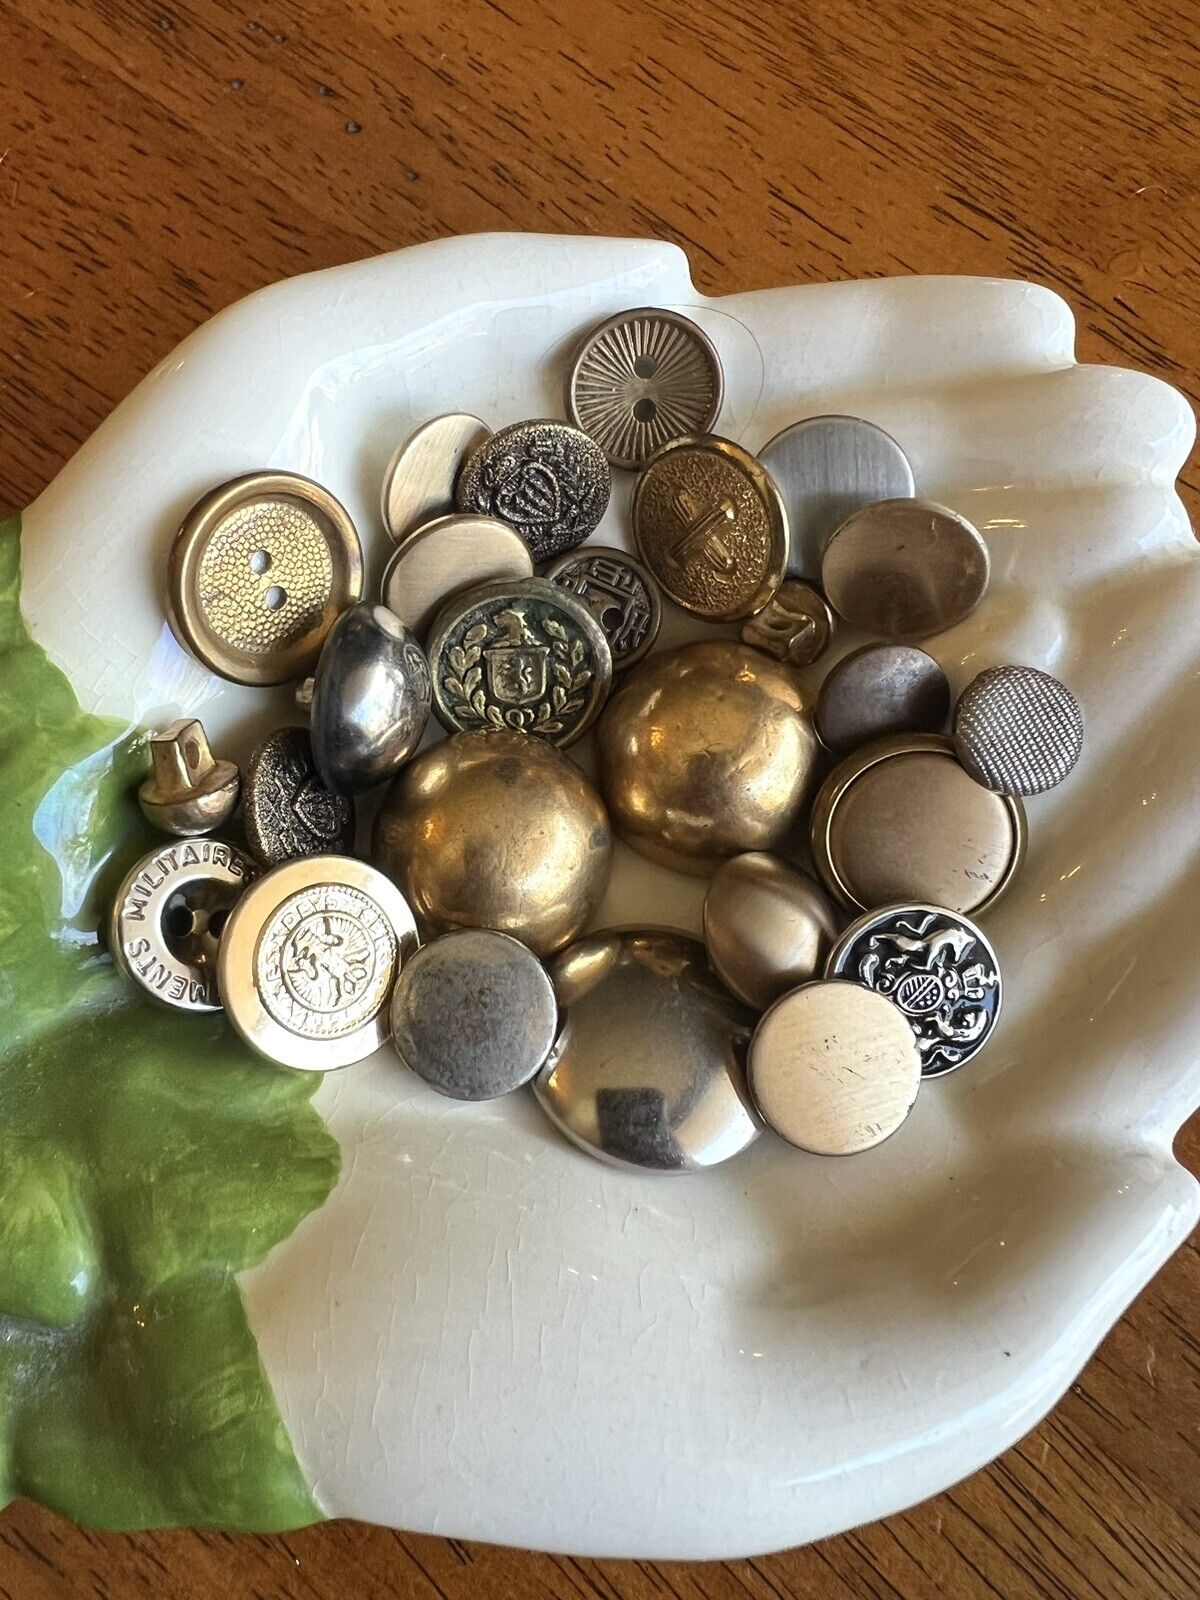 Vintage Antique Military And Other Estate Buttons Collectible Lot Militia War